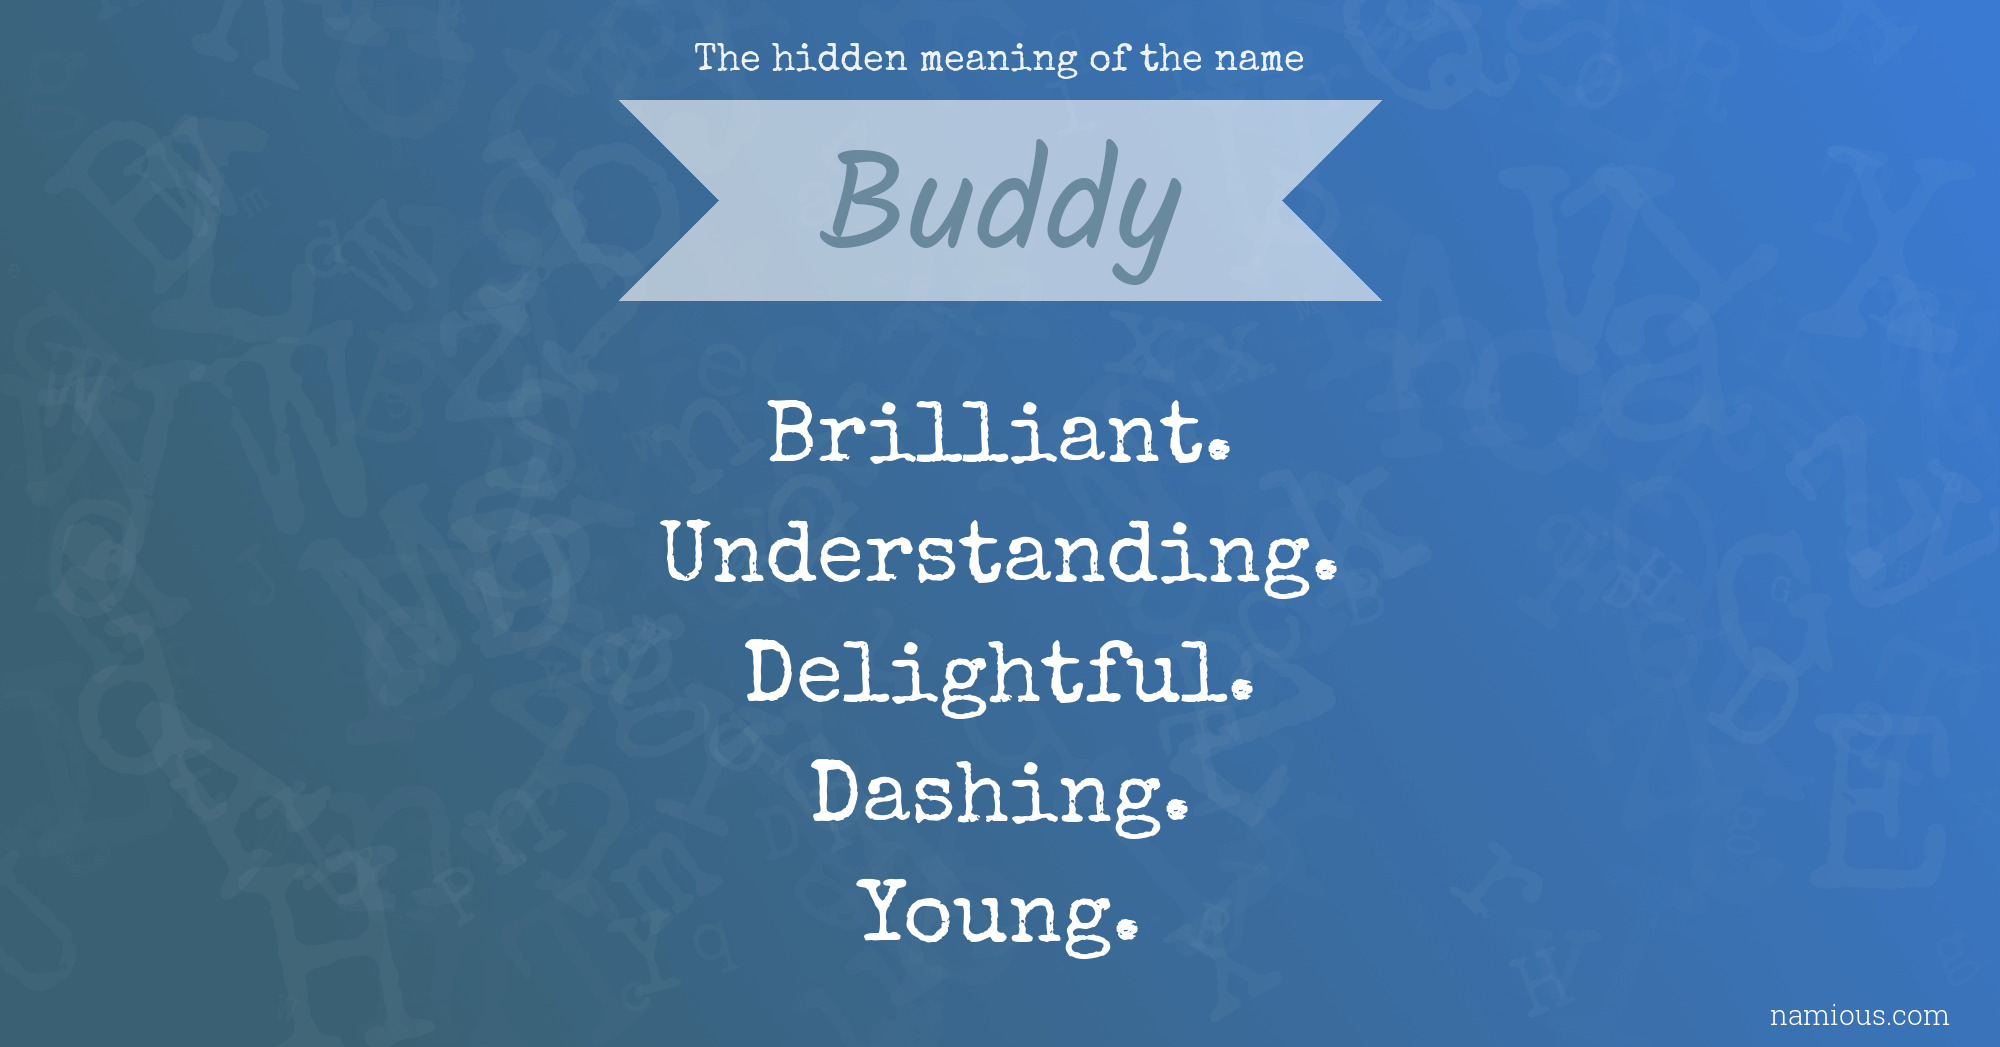 the-hidden-meaning-of-the-name-buddy-namious